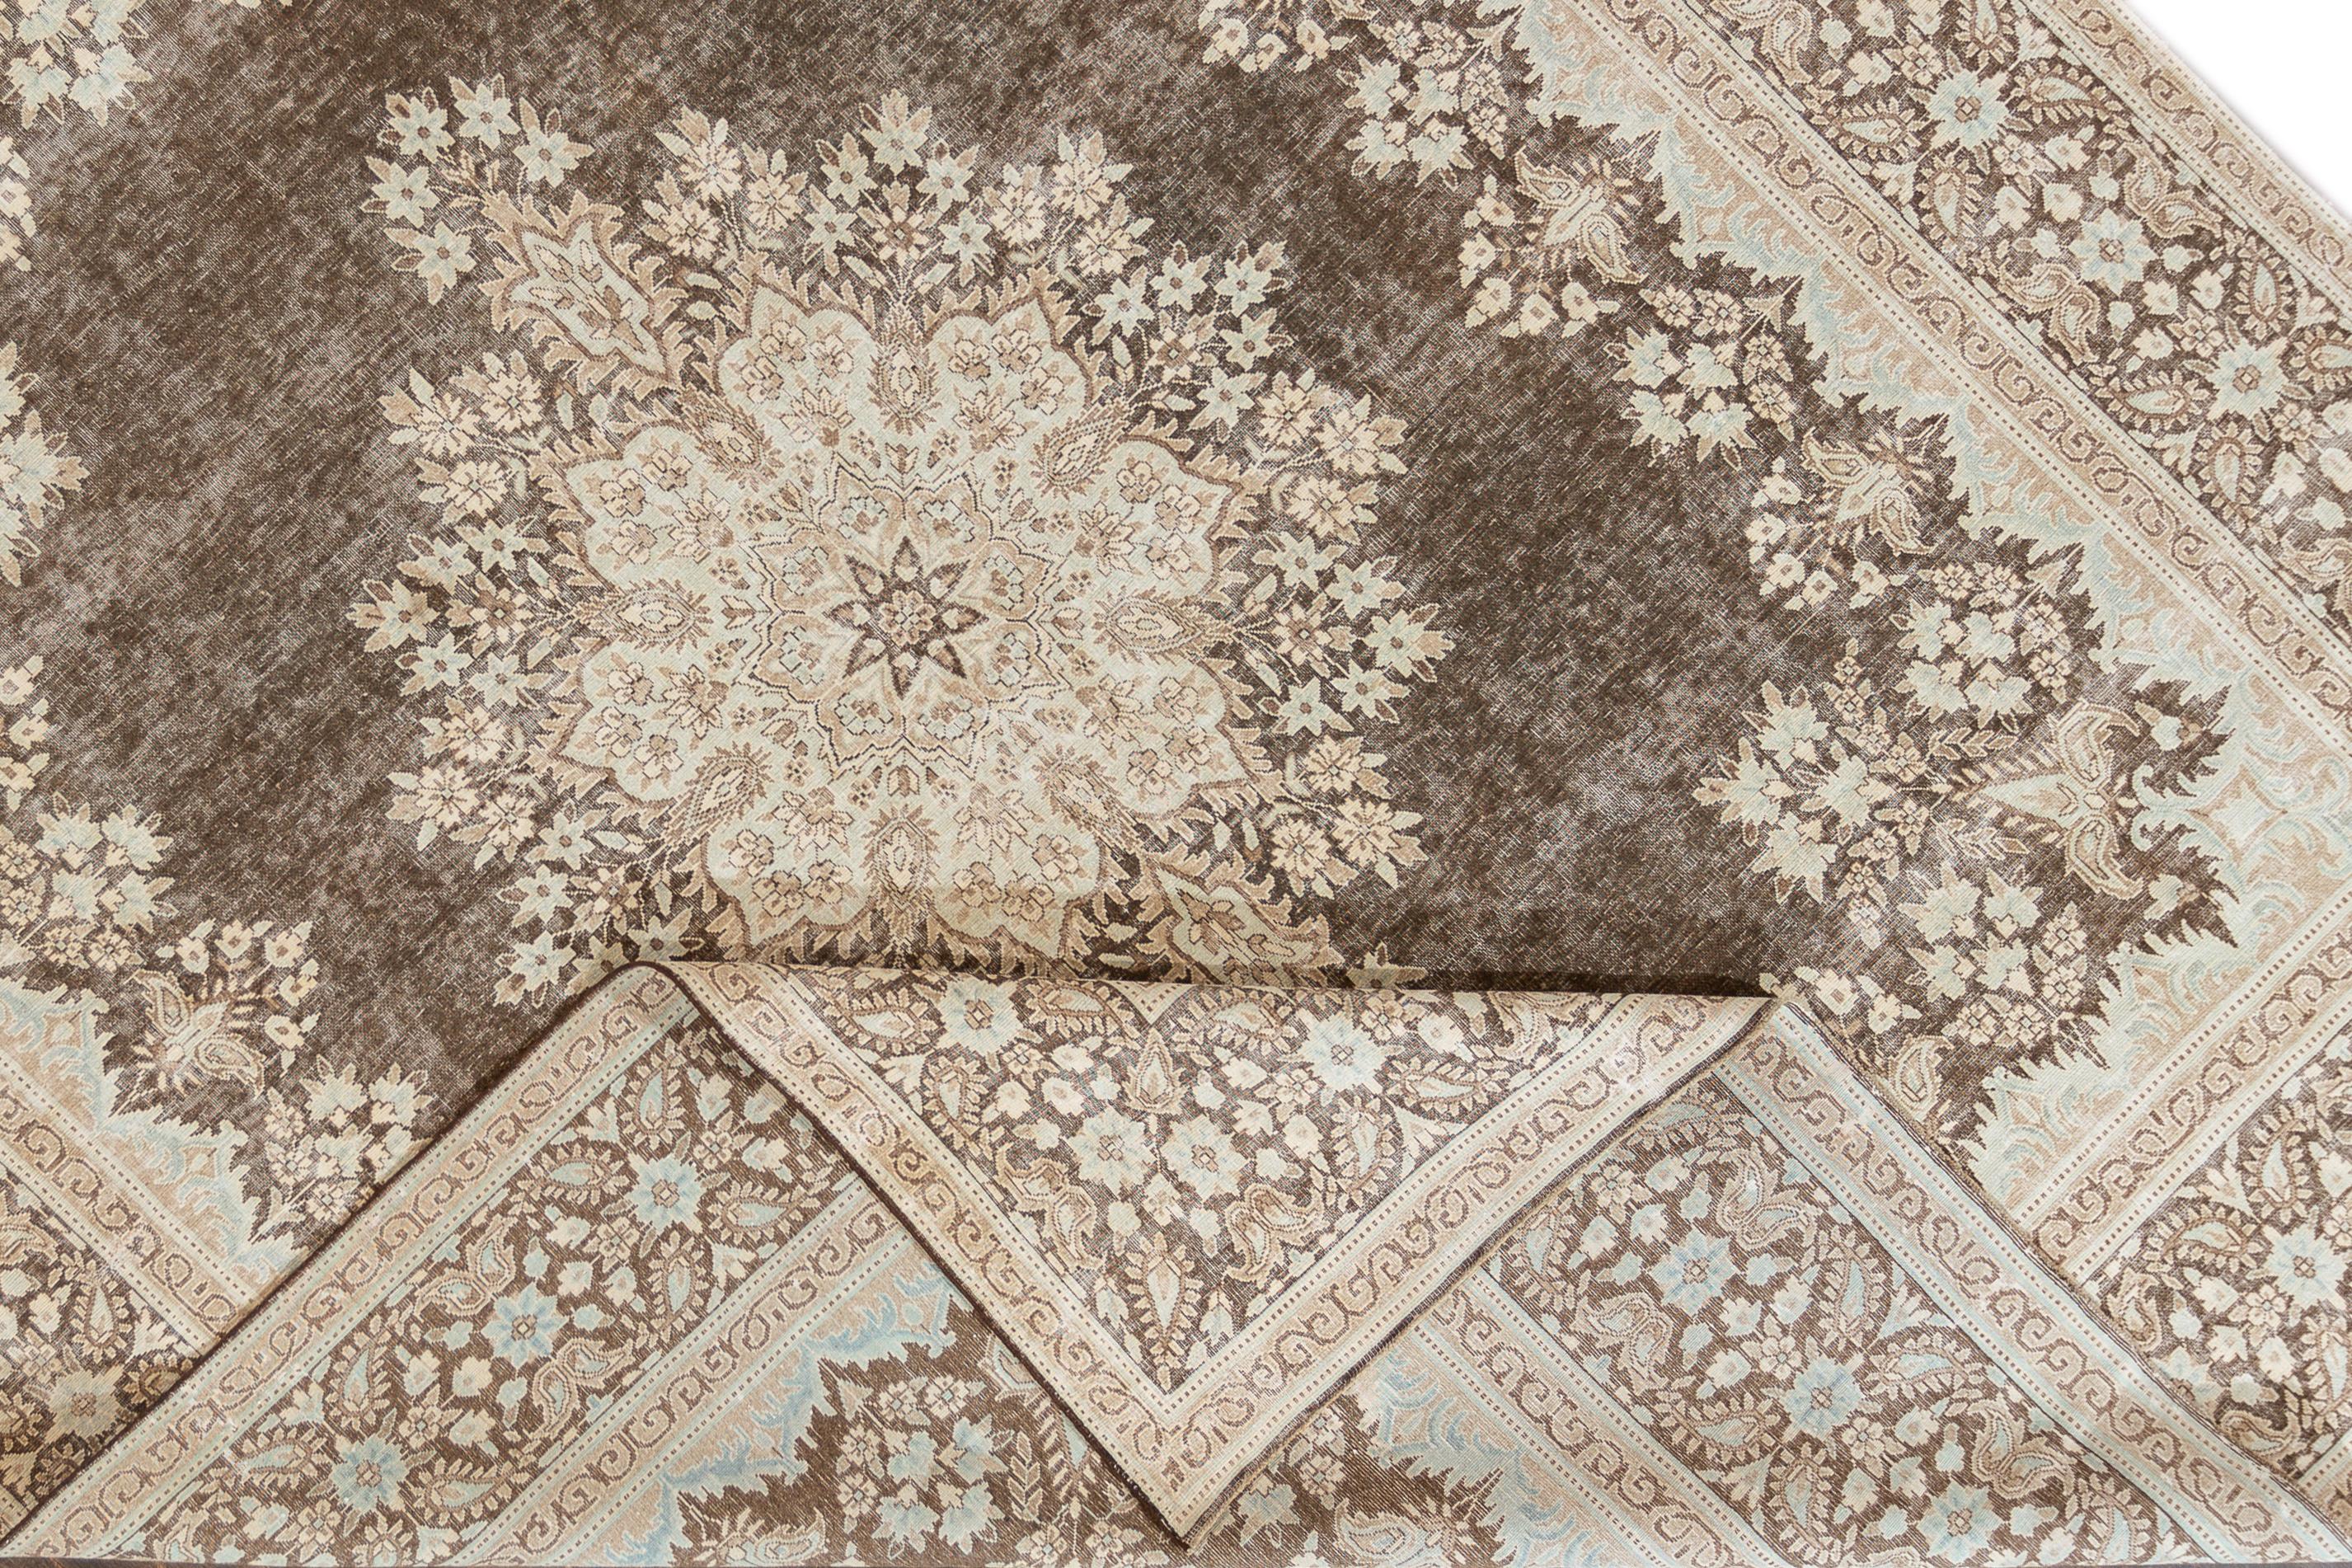 Vintage distressed rug with a brown field and pale blue and tan accents in a floral medallion design. This hand knotted wool rug measures 9'9